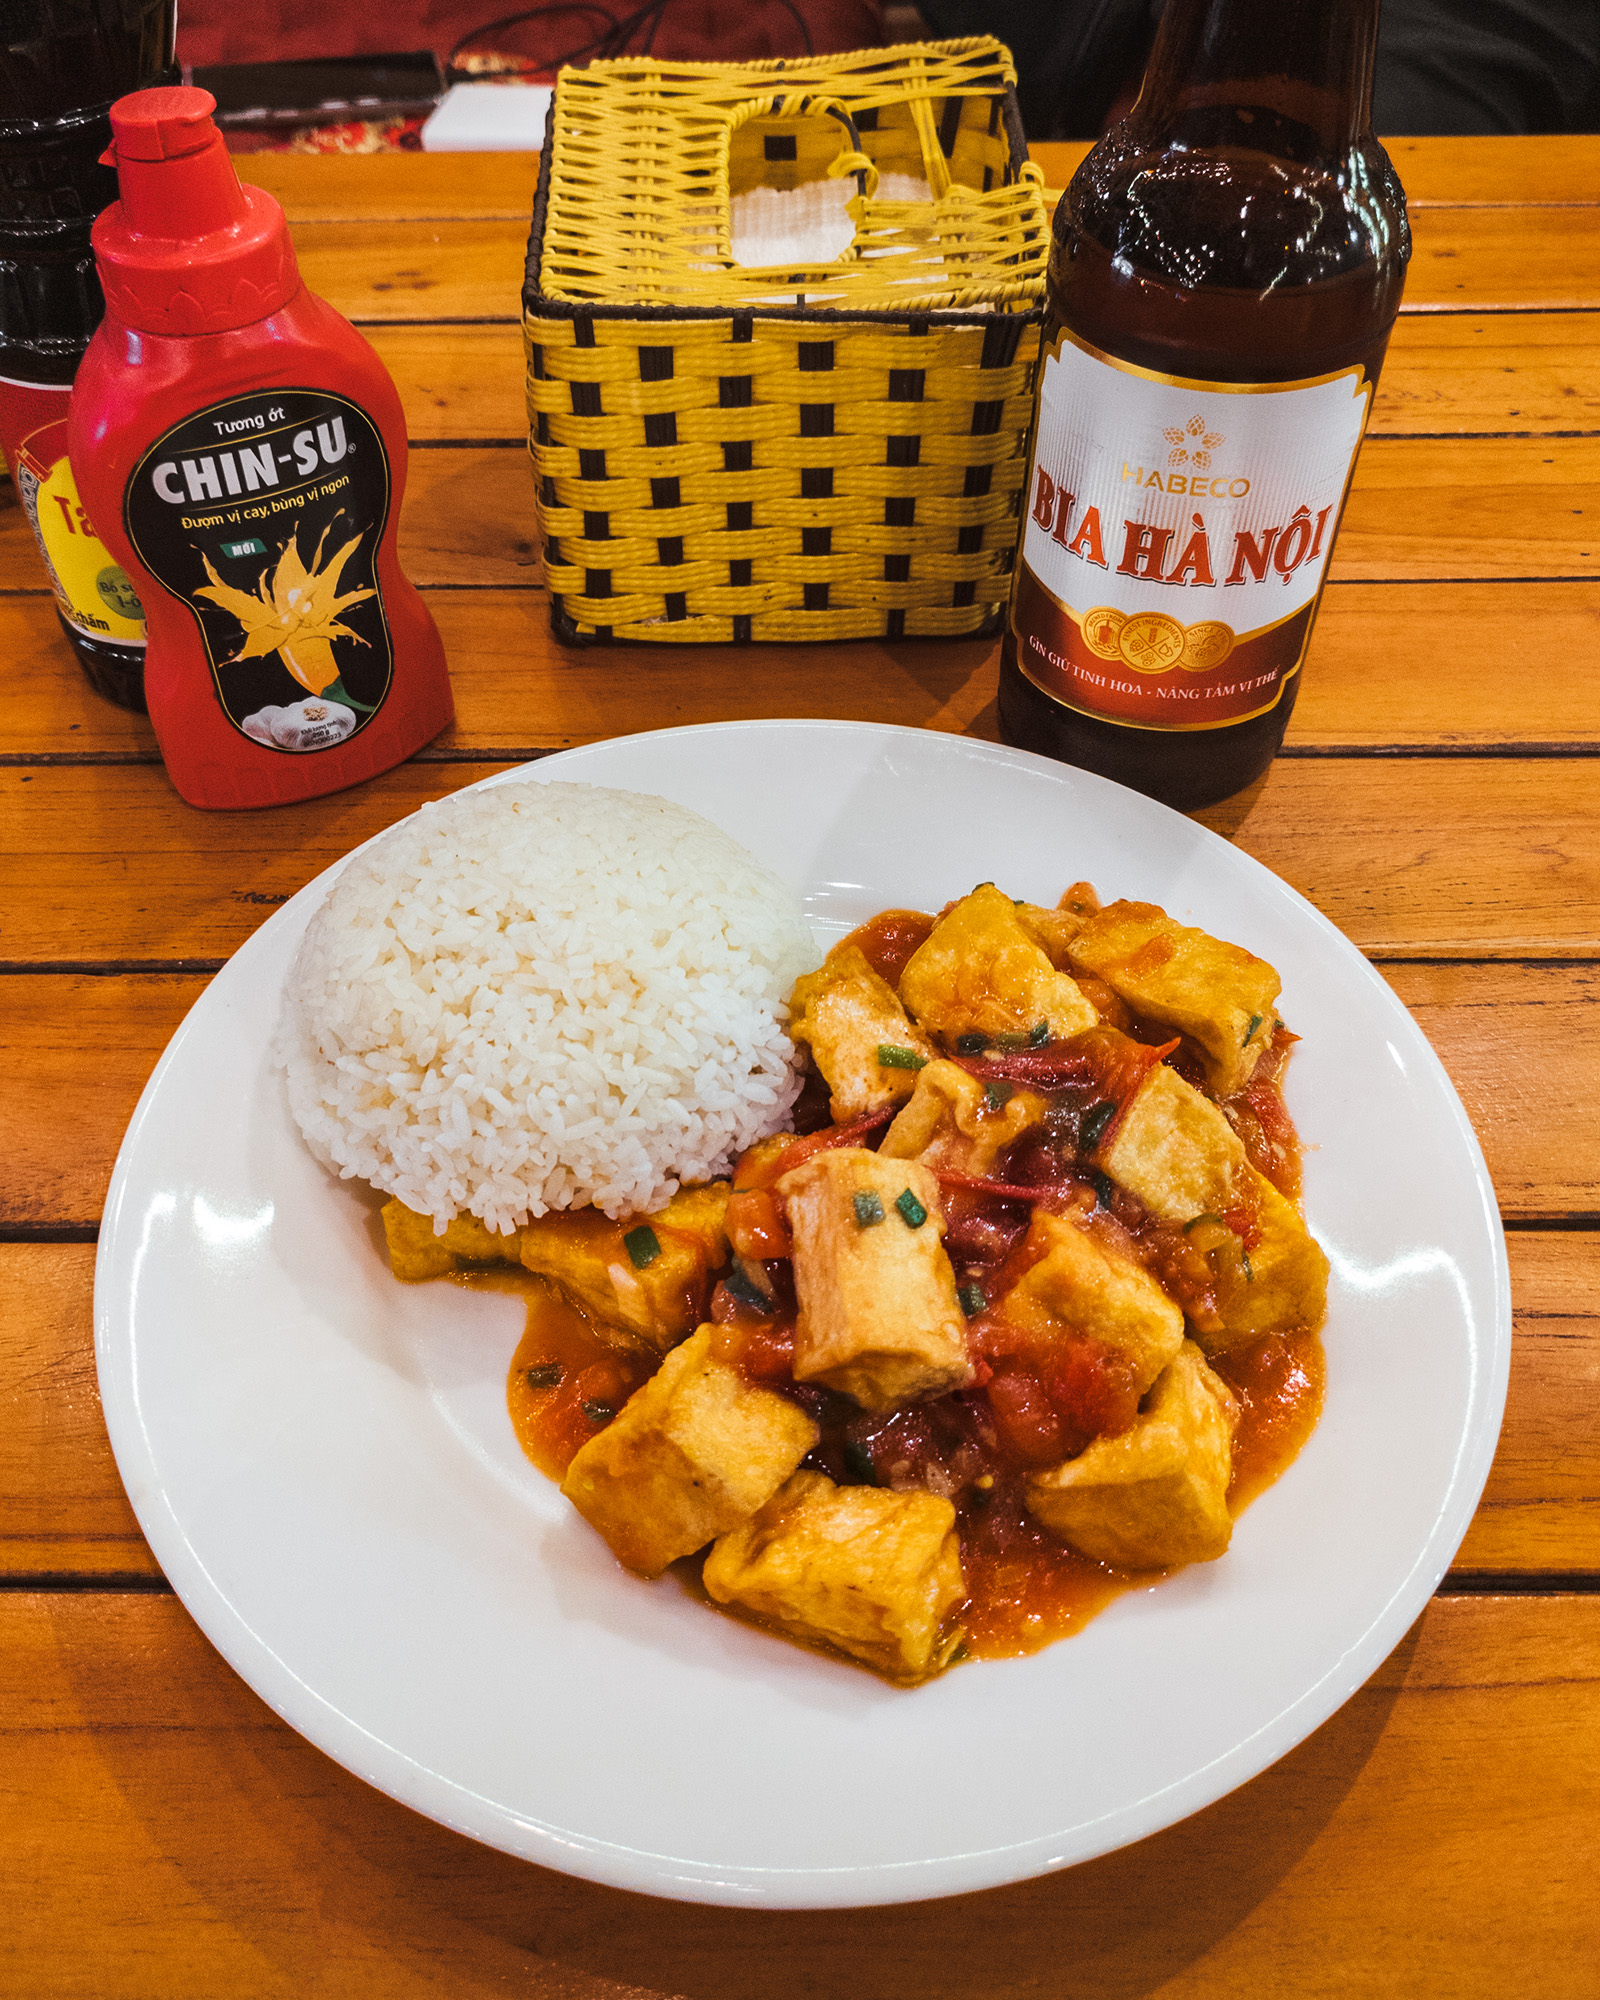 Tofu with tomato sauce and a beer at Ngoc Linh Restaurant in Tam Coc